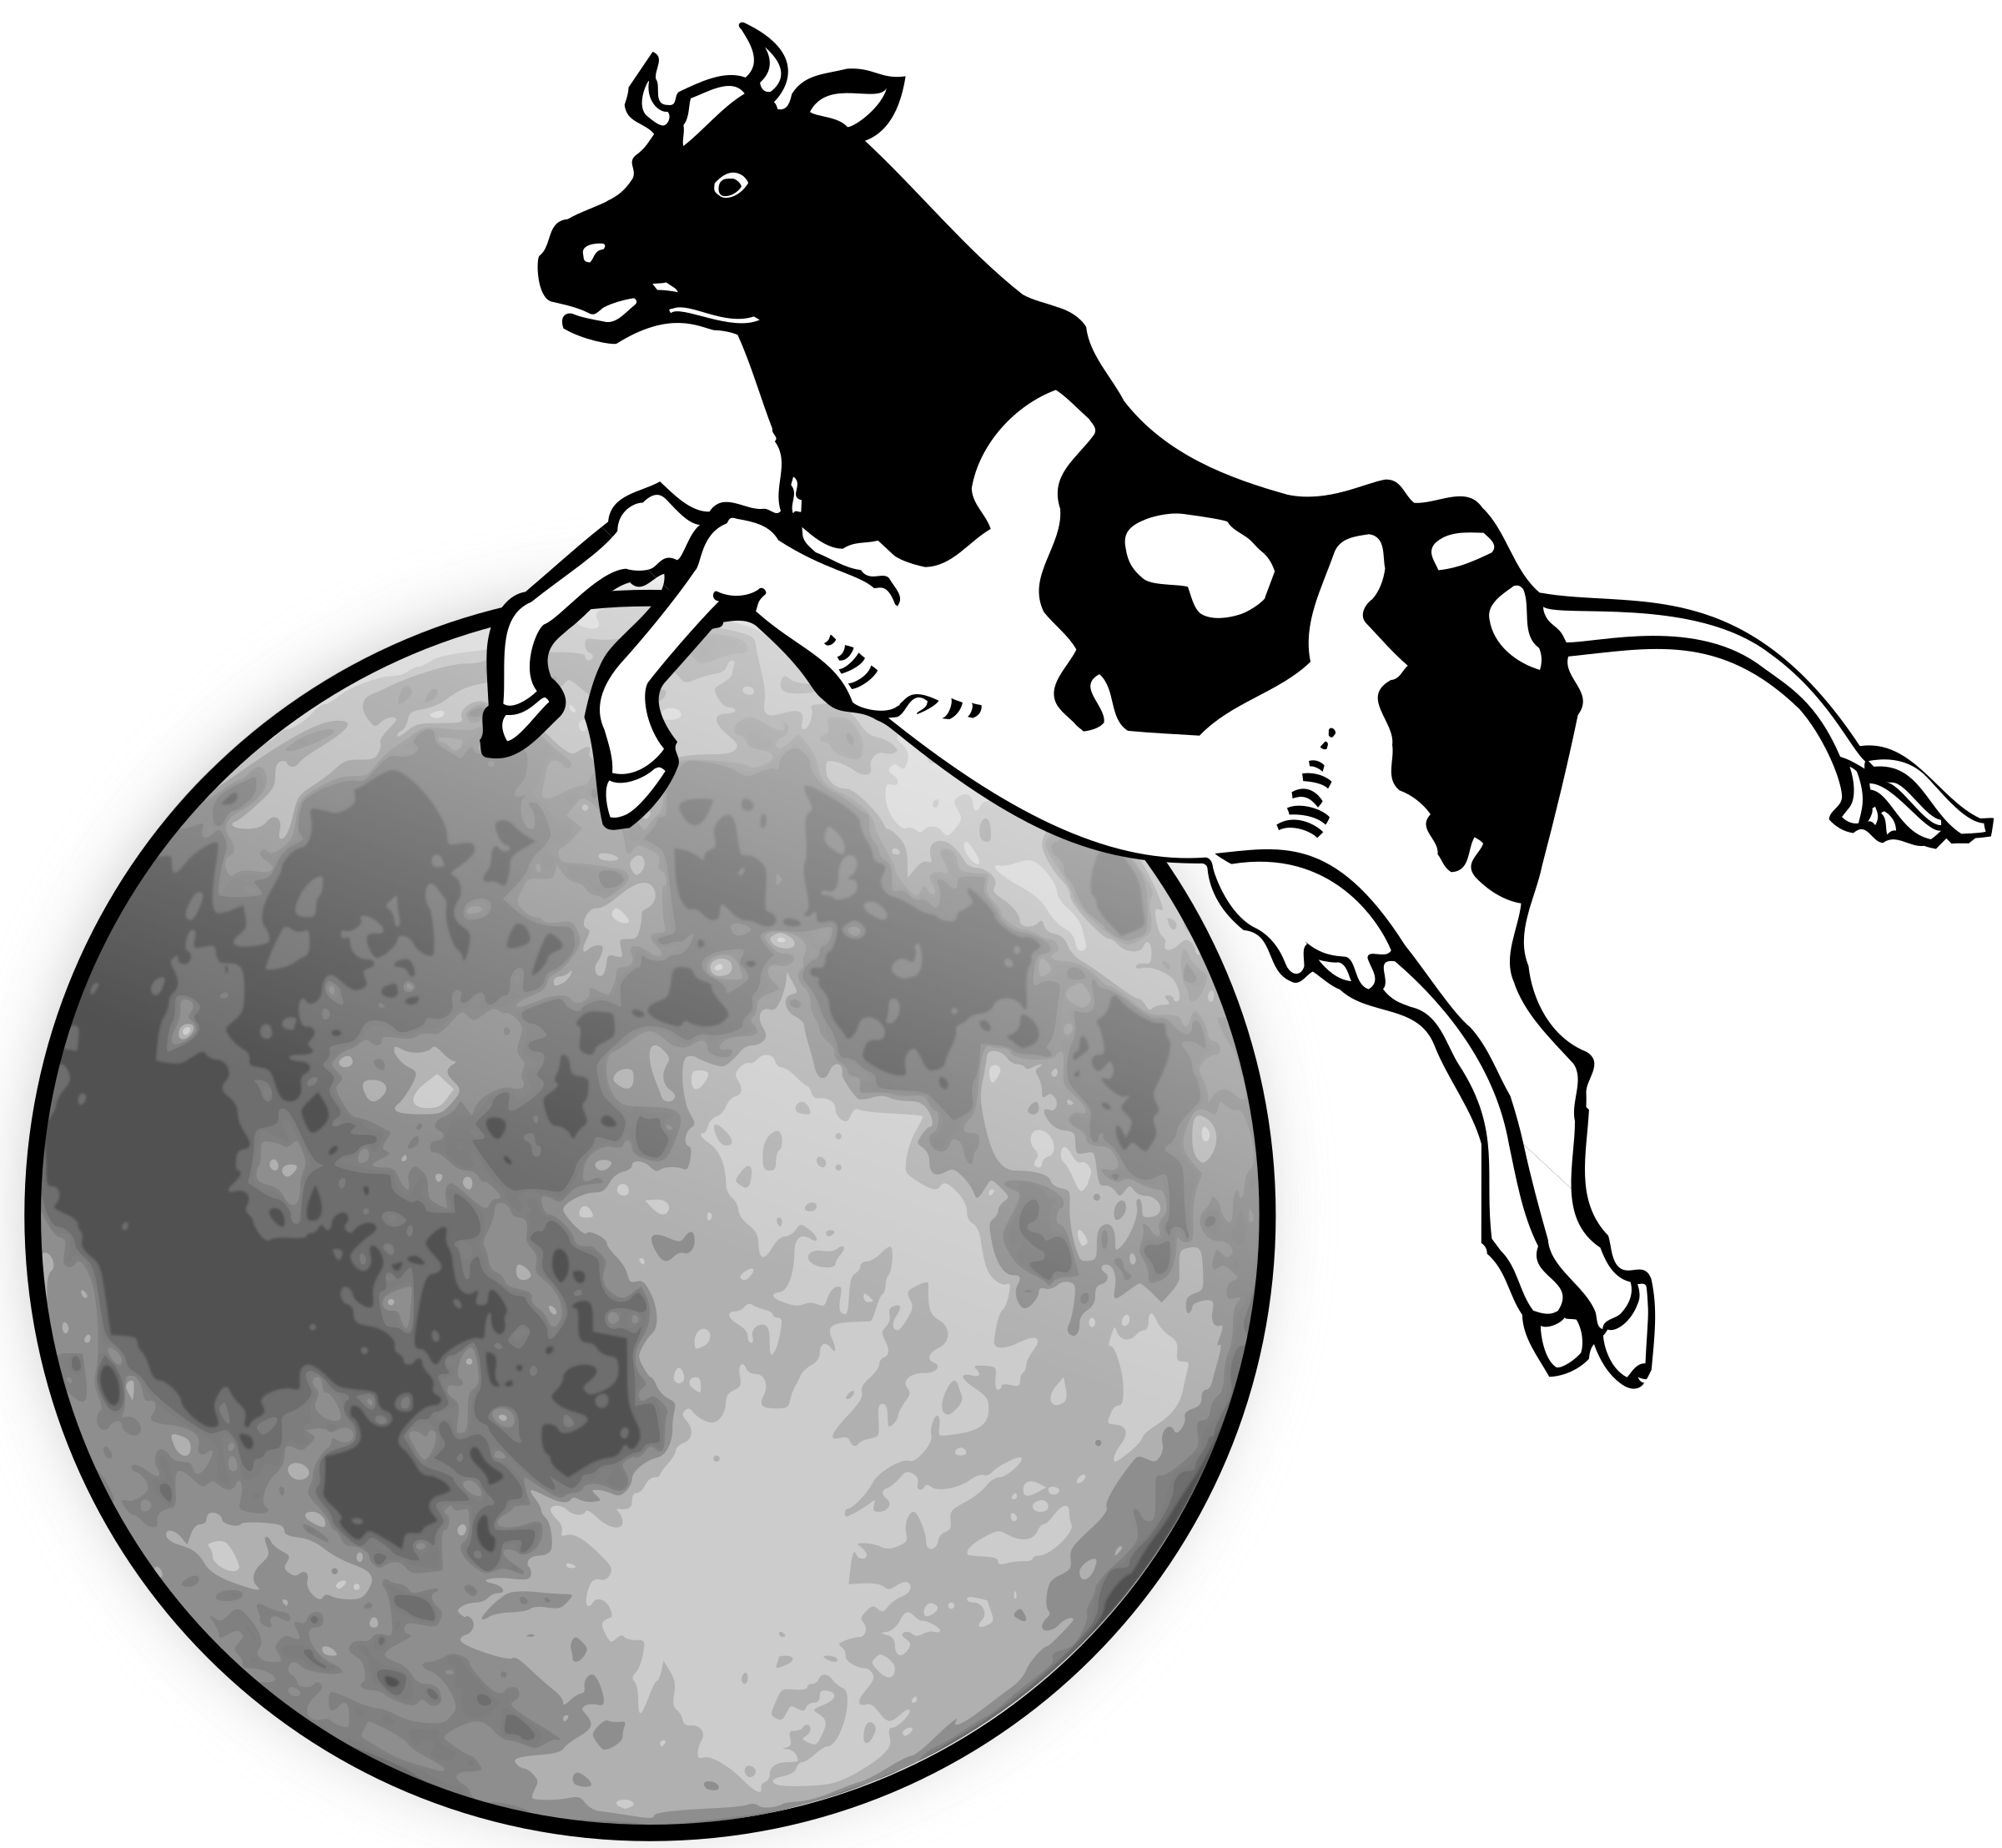 Cow jumping over the moon vector clipart image Free stock photo